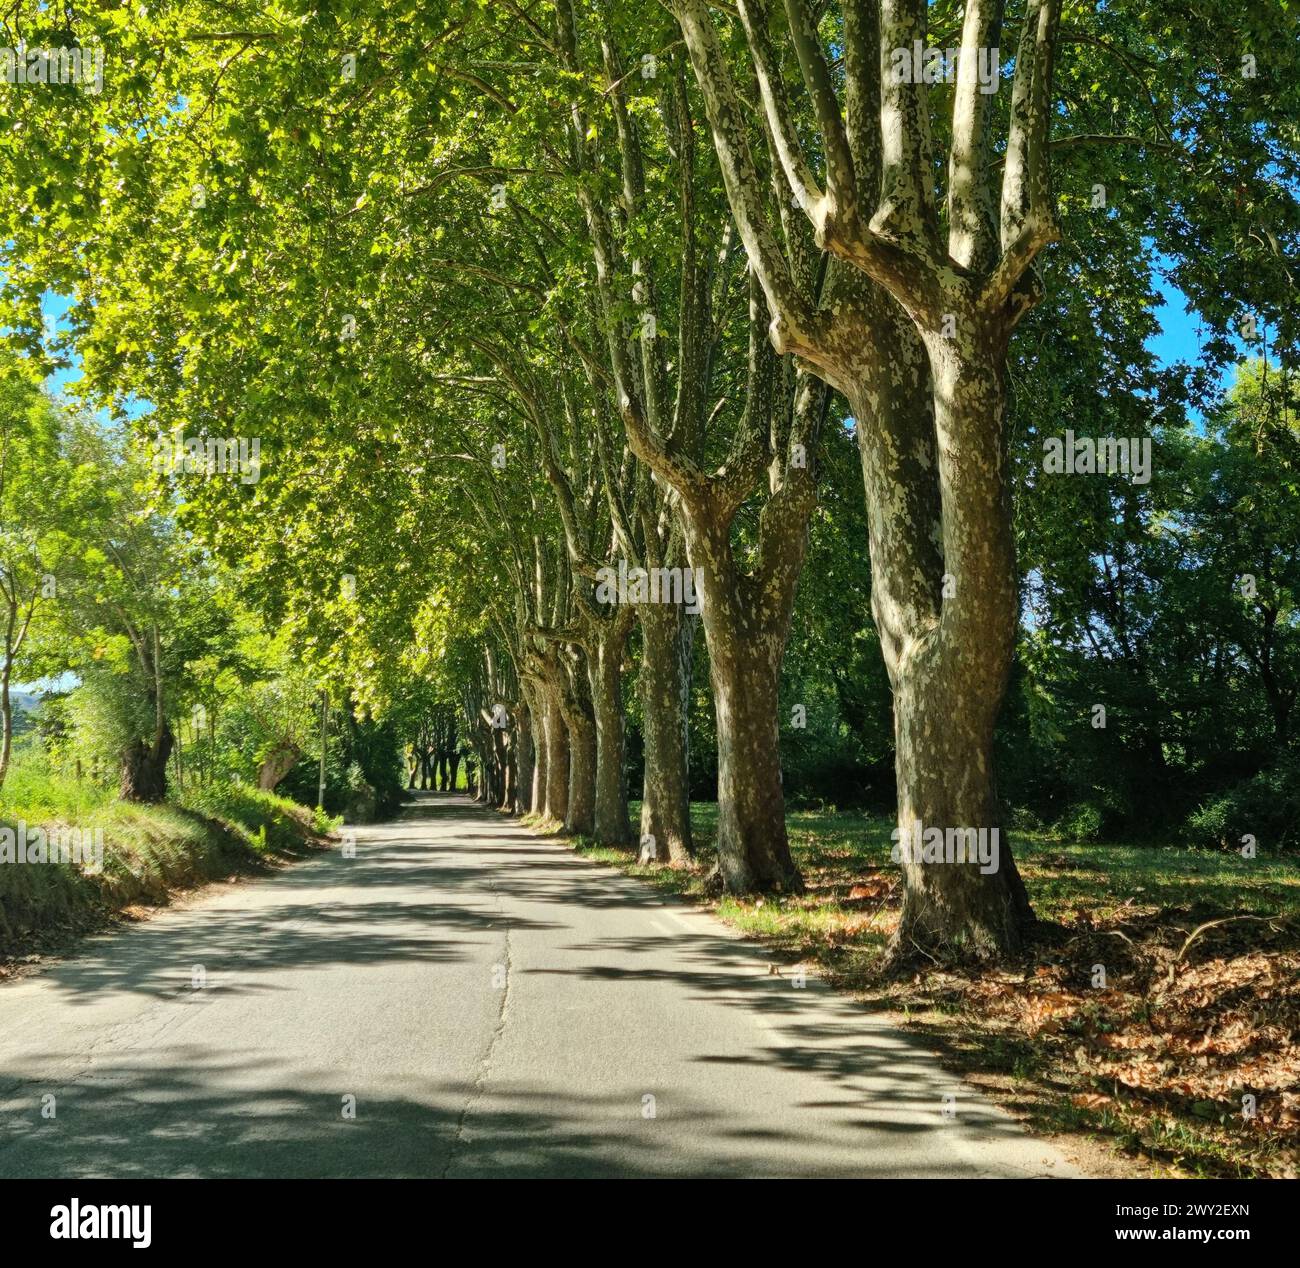 Platanus tree crowns form arche over rural road in France. Road trip in western France. Stock Photo